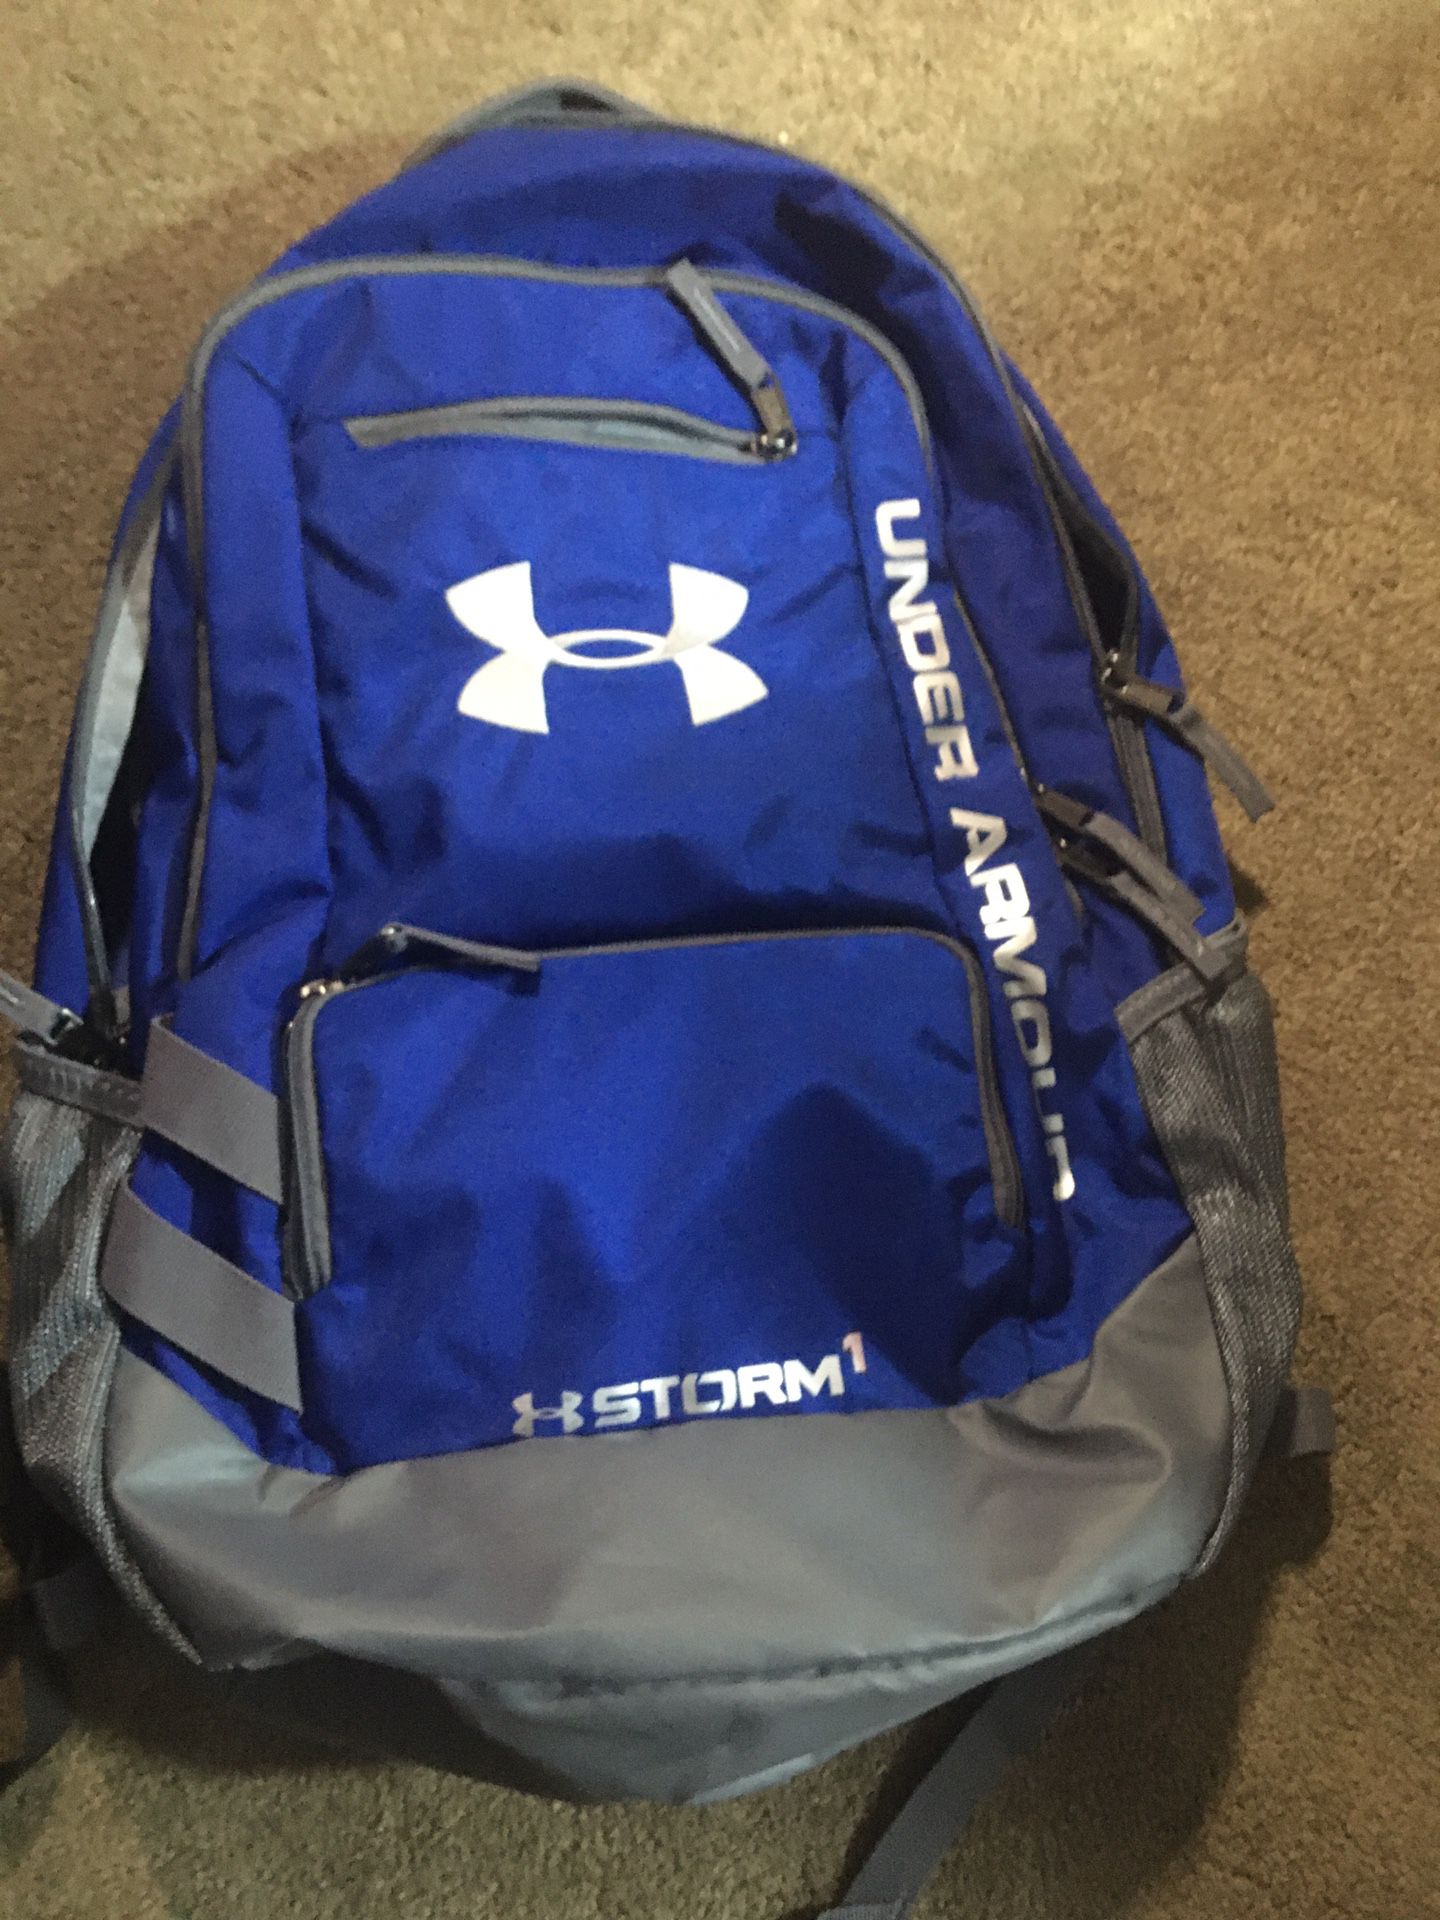 UnderArmour backpack